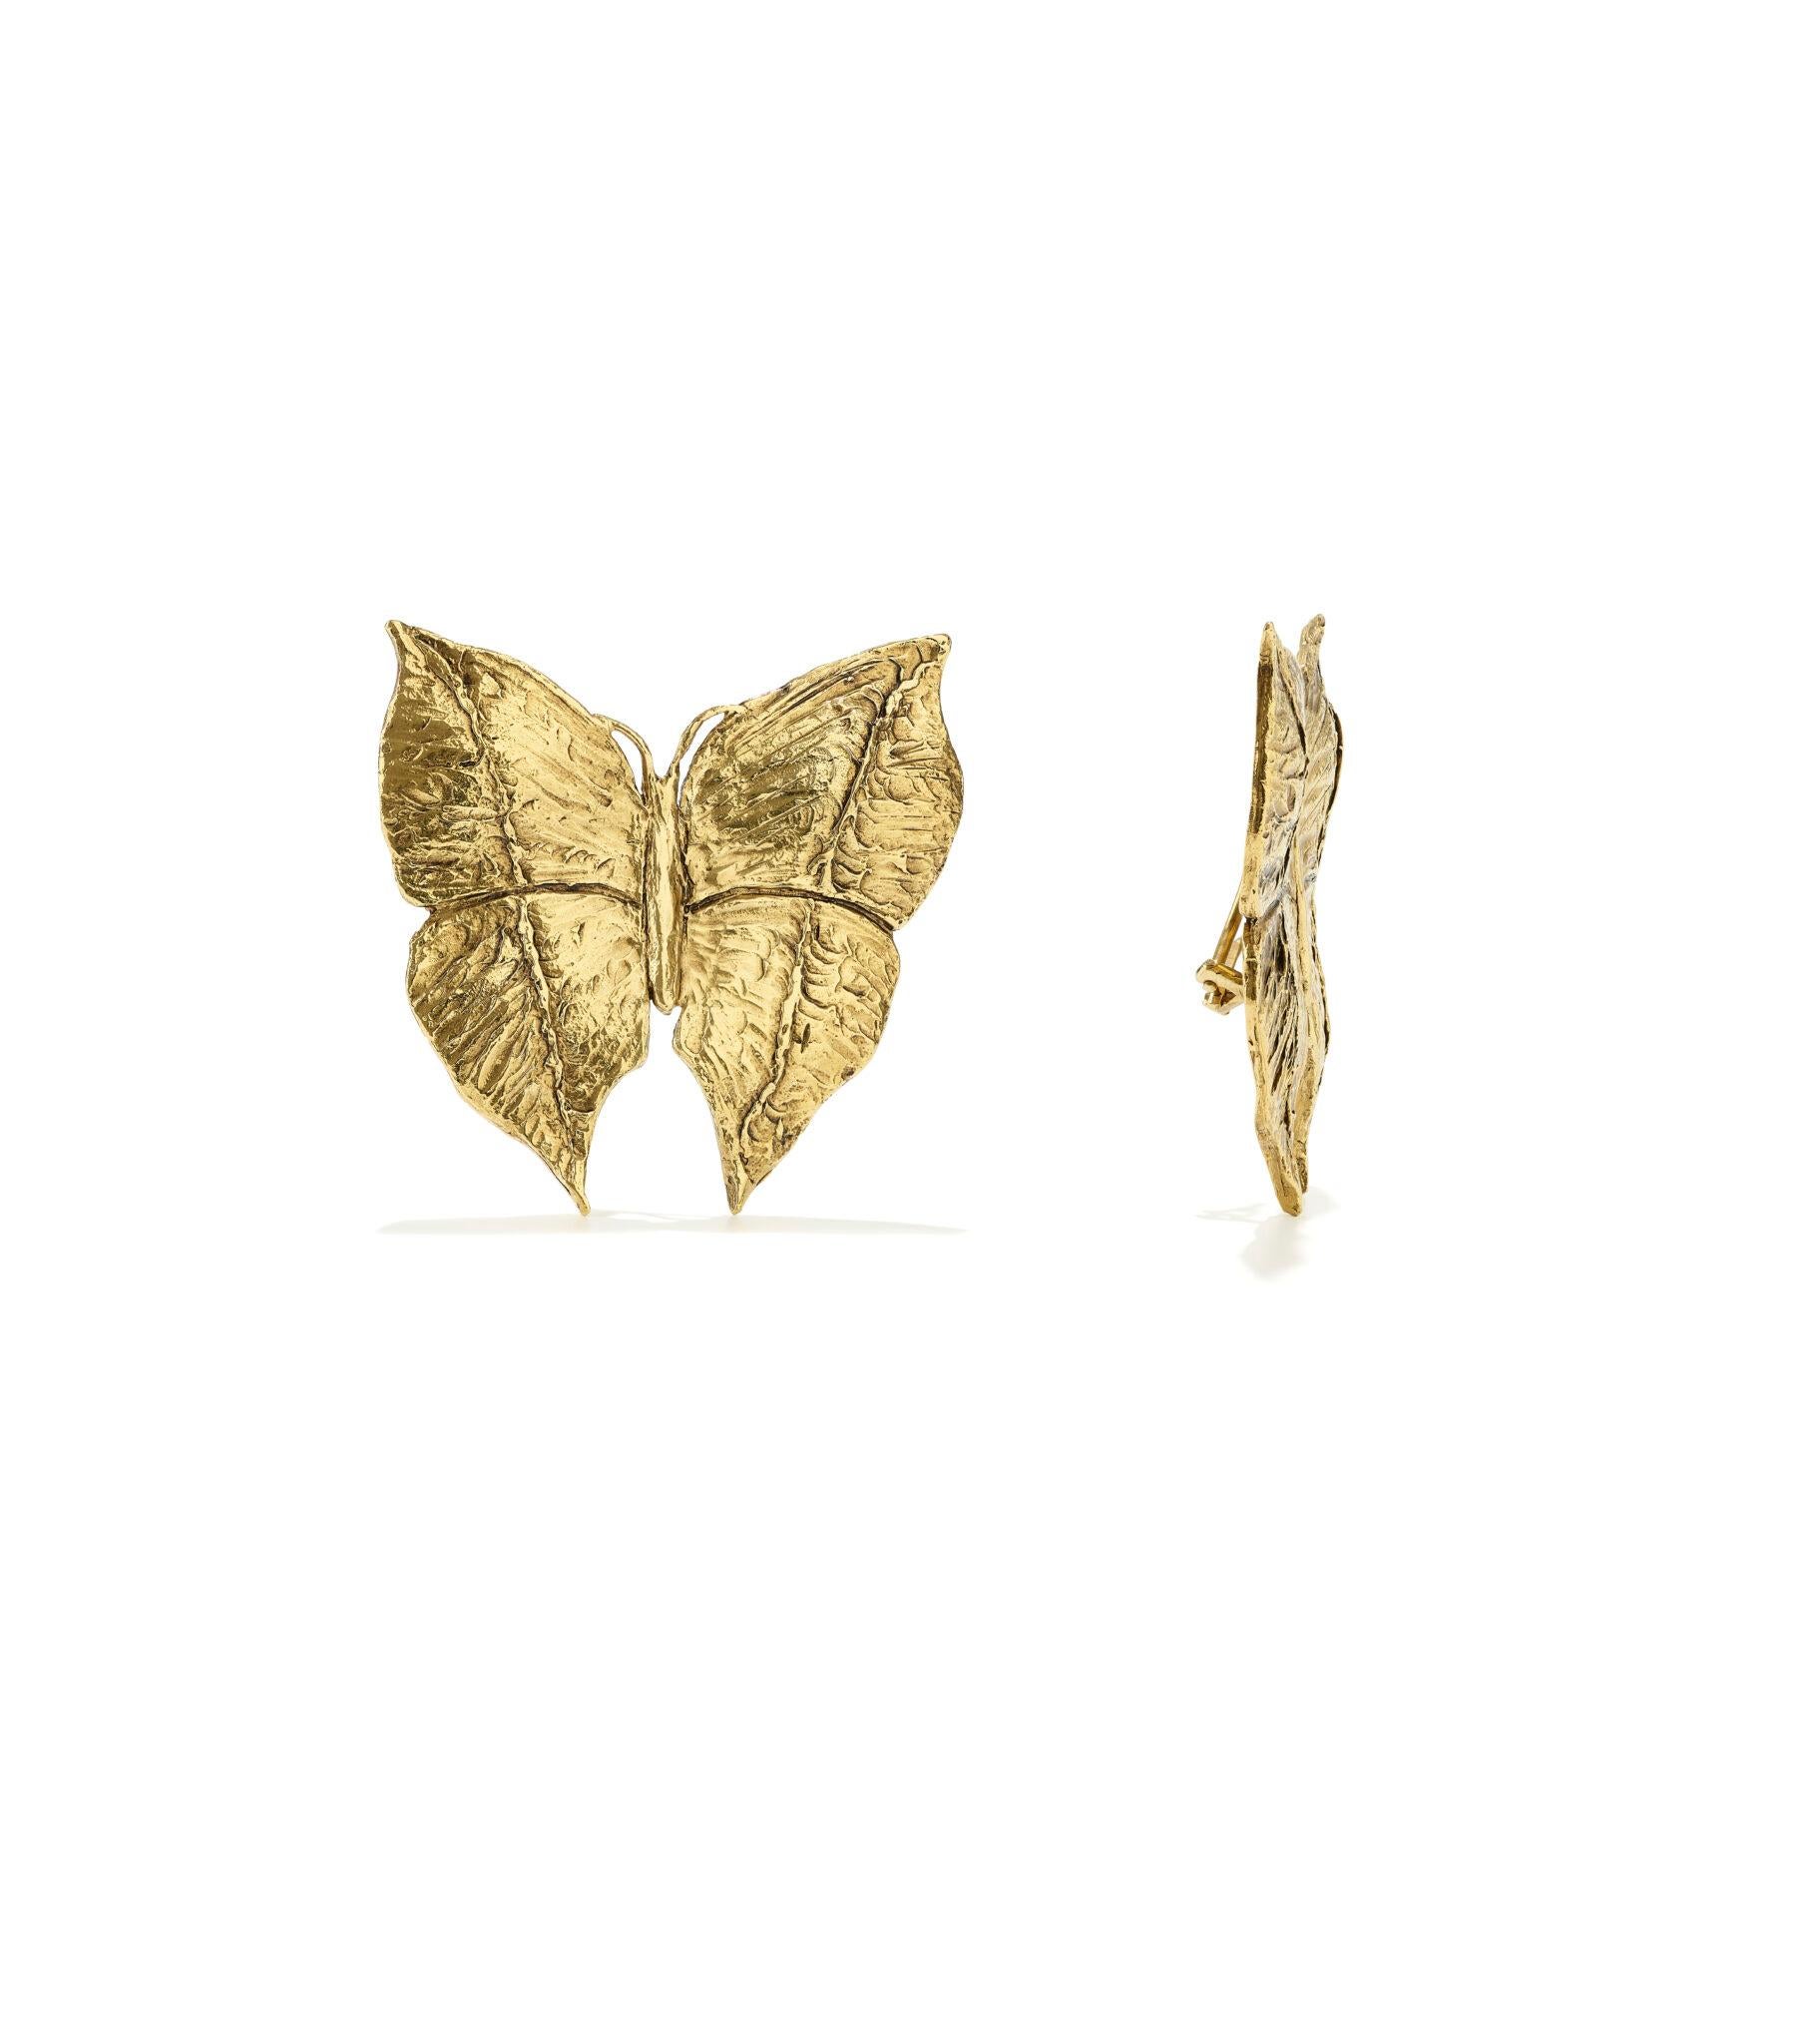 Harumi 
butterfly earrings

Endowed wit h a unique creative freedom, the jewelry artist Harumi Klossowska de Rola, seeks to build bridges between human and plant worlds. This third capsule collection continues to explore animals and emphasizes the